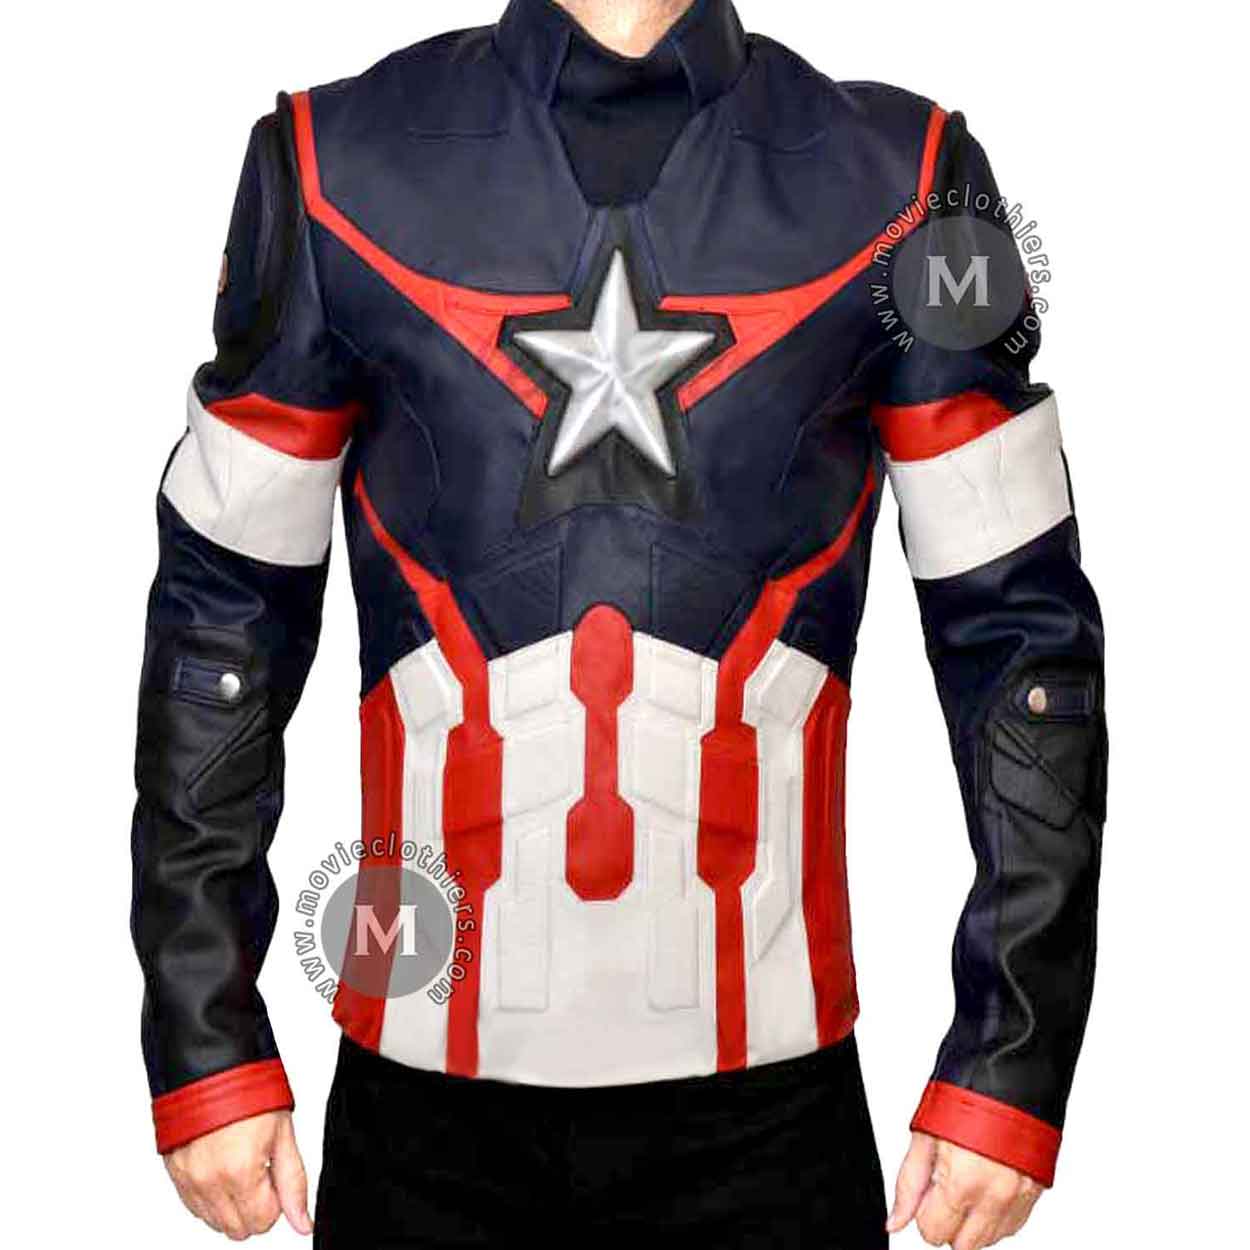 Detail Captain America Motorcycle Jacket With Armor Nomer 36